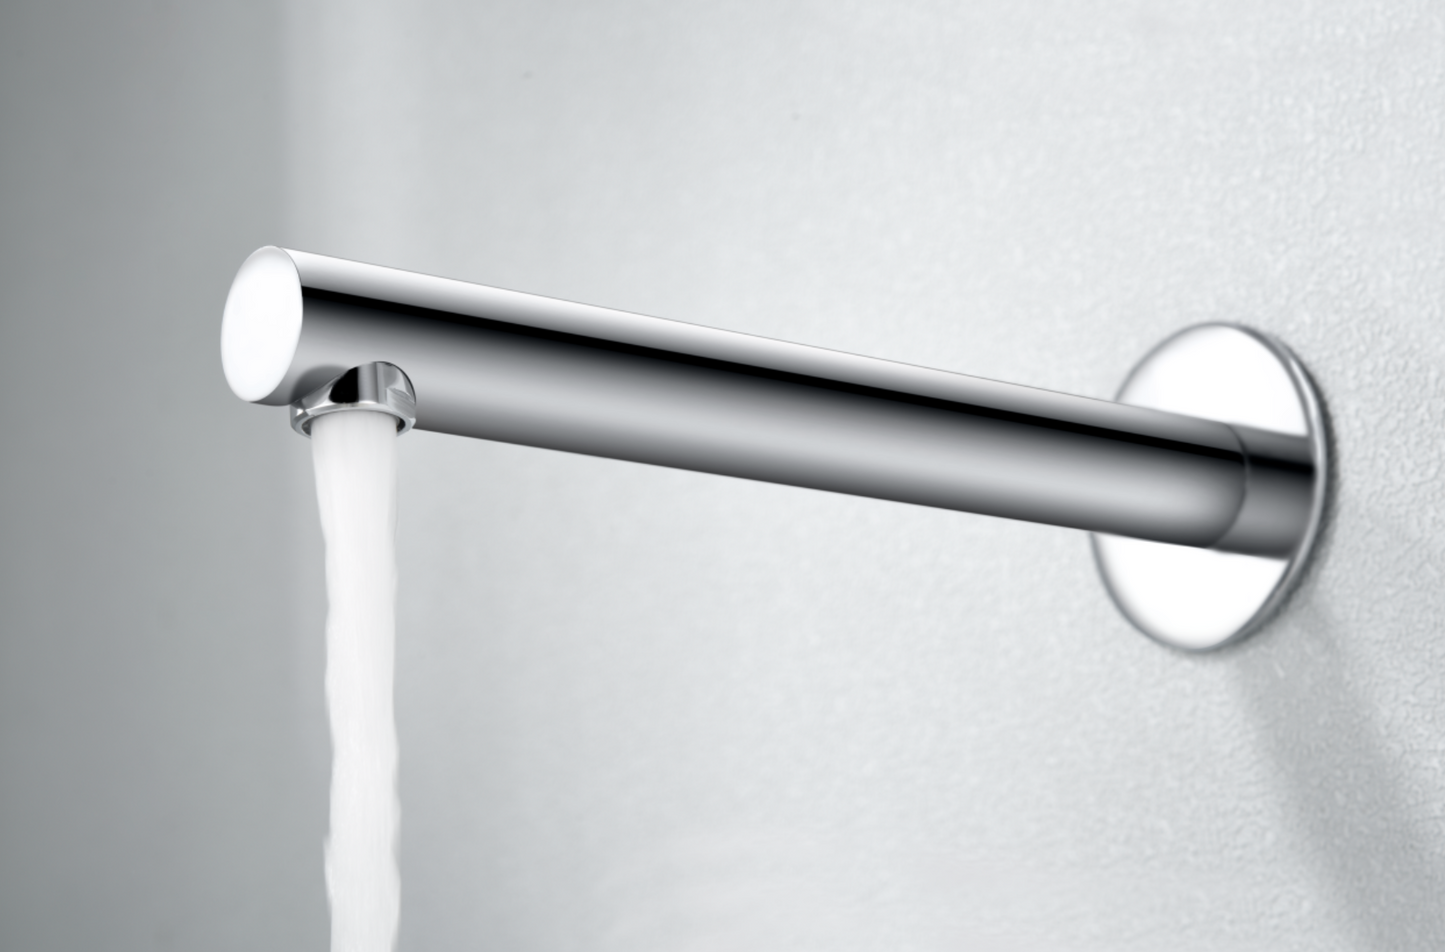 Olimpo chrome built-in sink faucet by Imex 